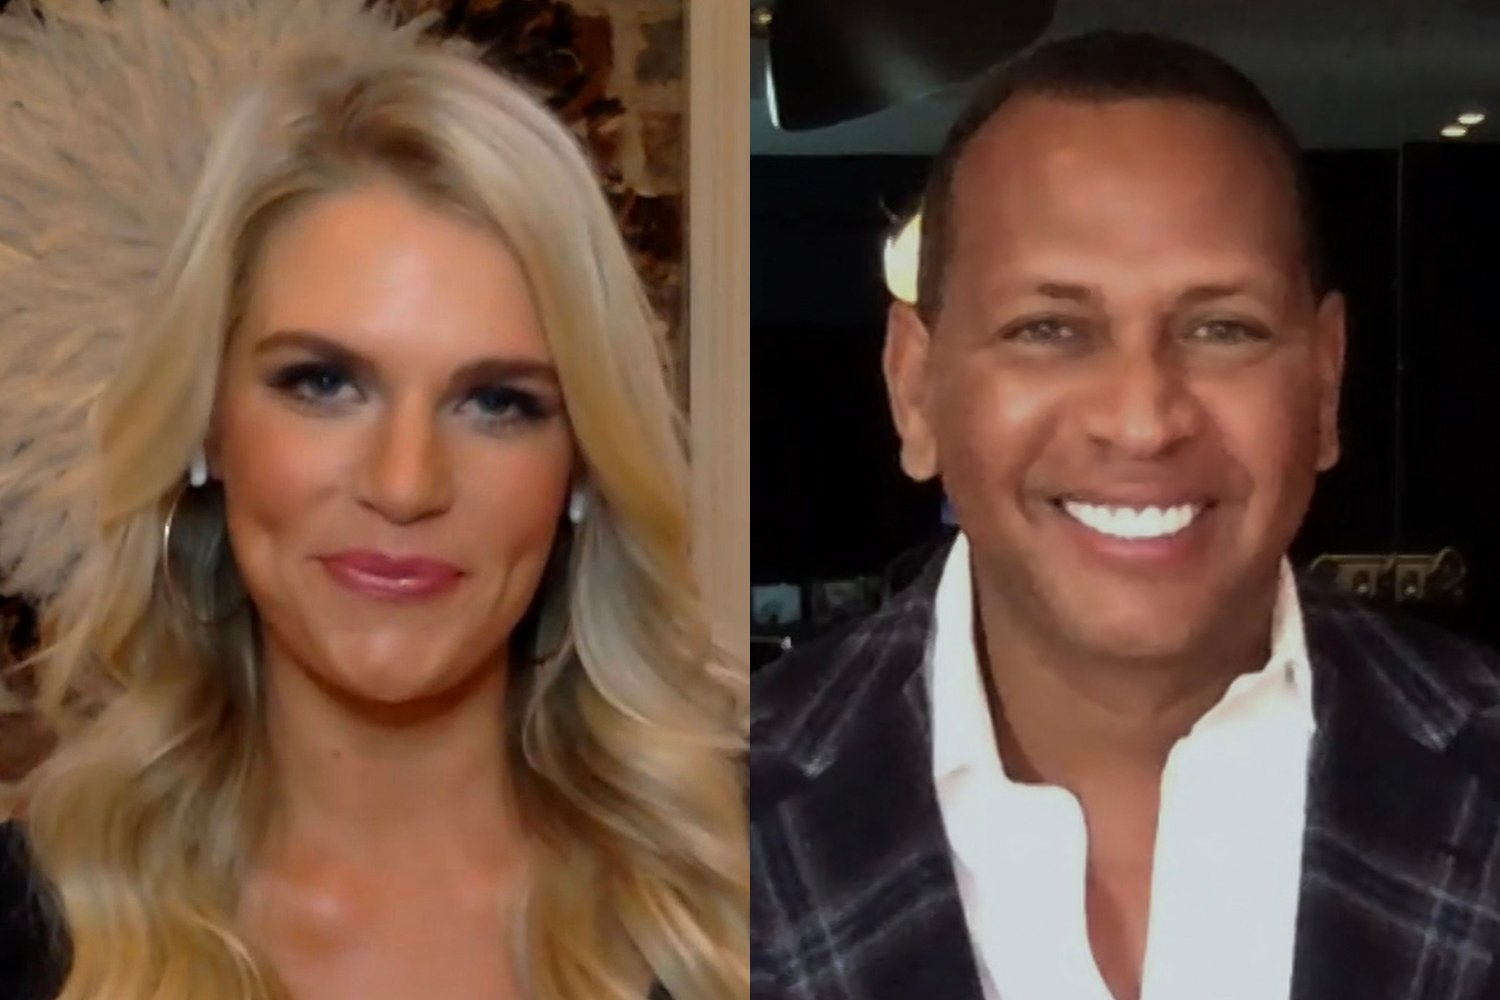 ‘Southern Charm’: Danni Baird Confirms Alex Rodriguez Is Ex-MLB Player Madison LeCroy FaceTimed